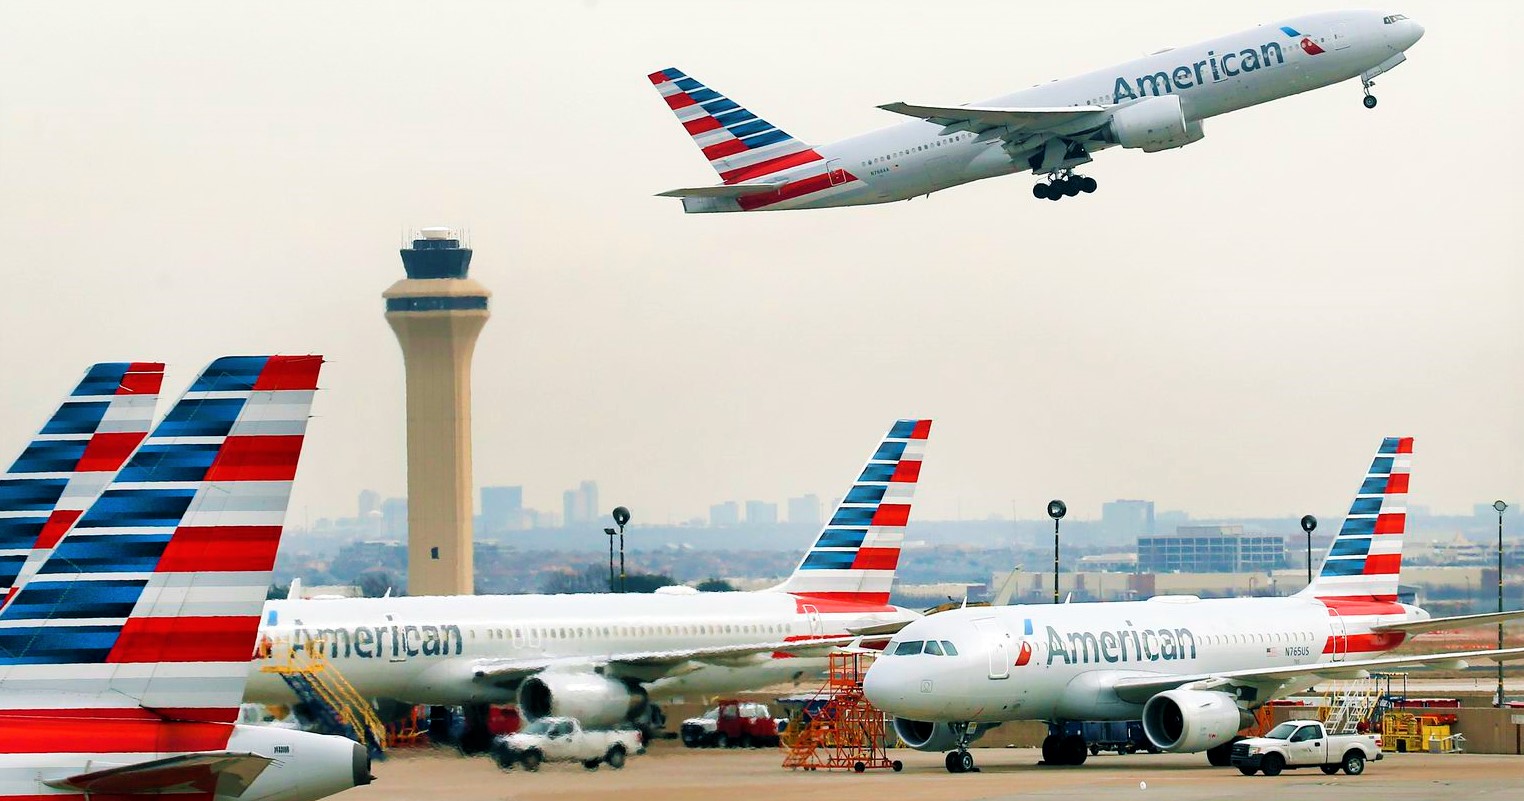 Positive  trend - After United  and  JetBlue  hiring  efforts ,  American airlines to add 300 pilots by year end  !